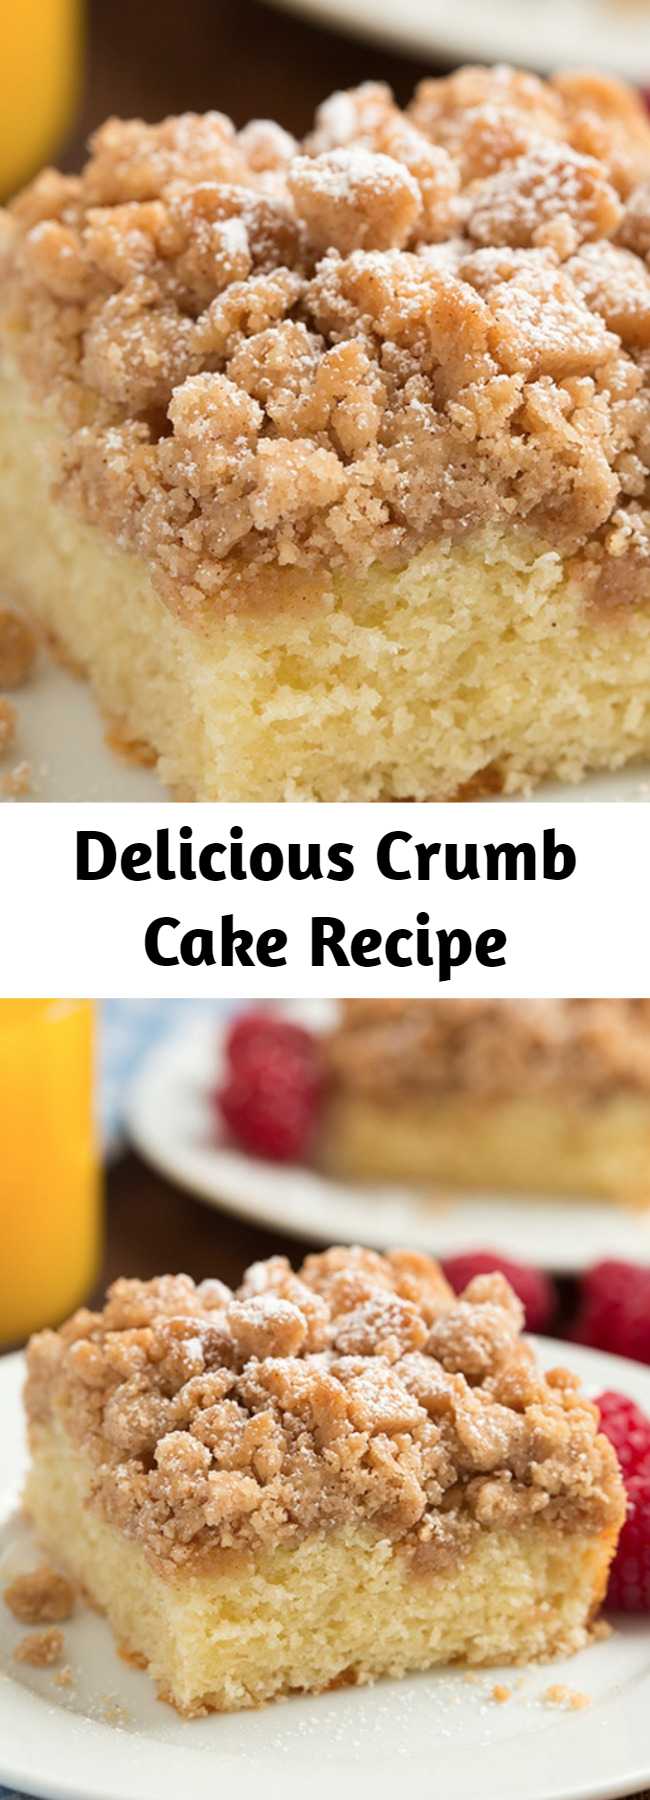 Delicious Crumb Cake Recipe - A deliciously soft and tender cake topped with a crisp buttery crumble. Perfect for a weekend breakfast or holiday brunch.